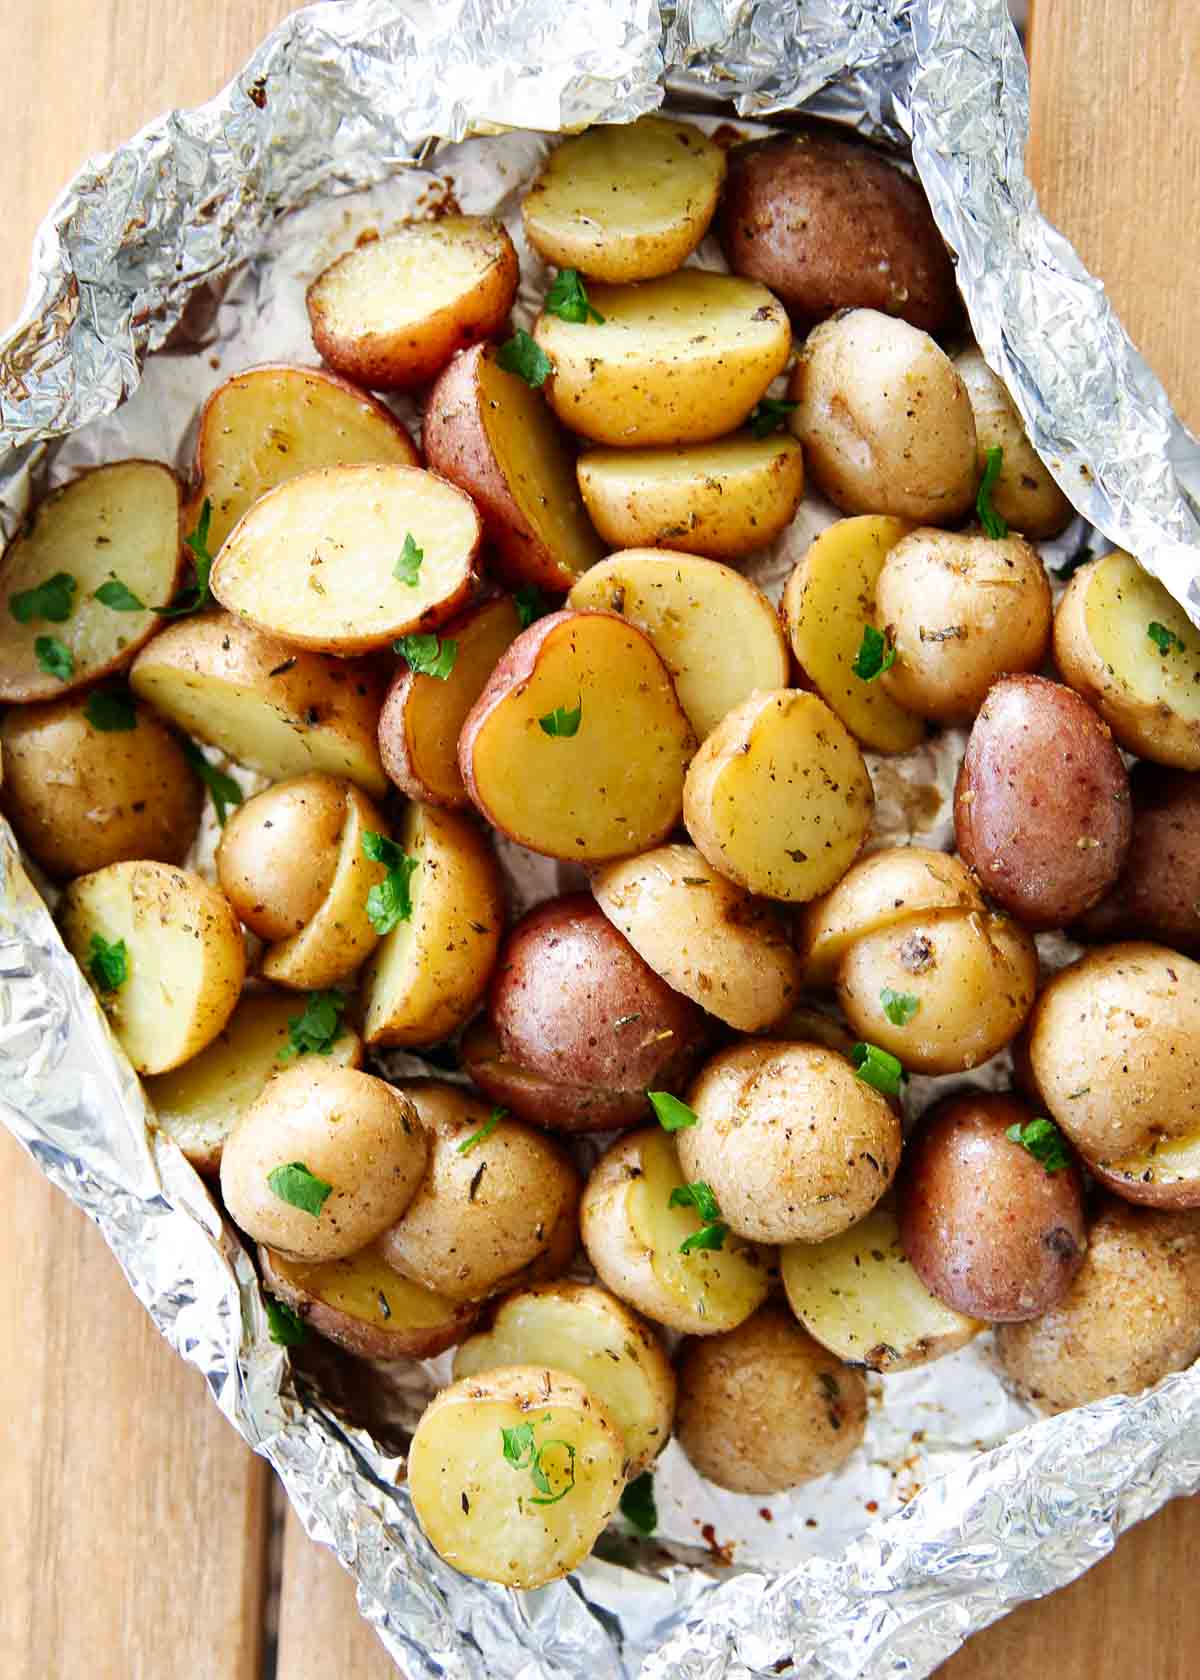 Grilled potatoes in a foil packet on a table.